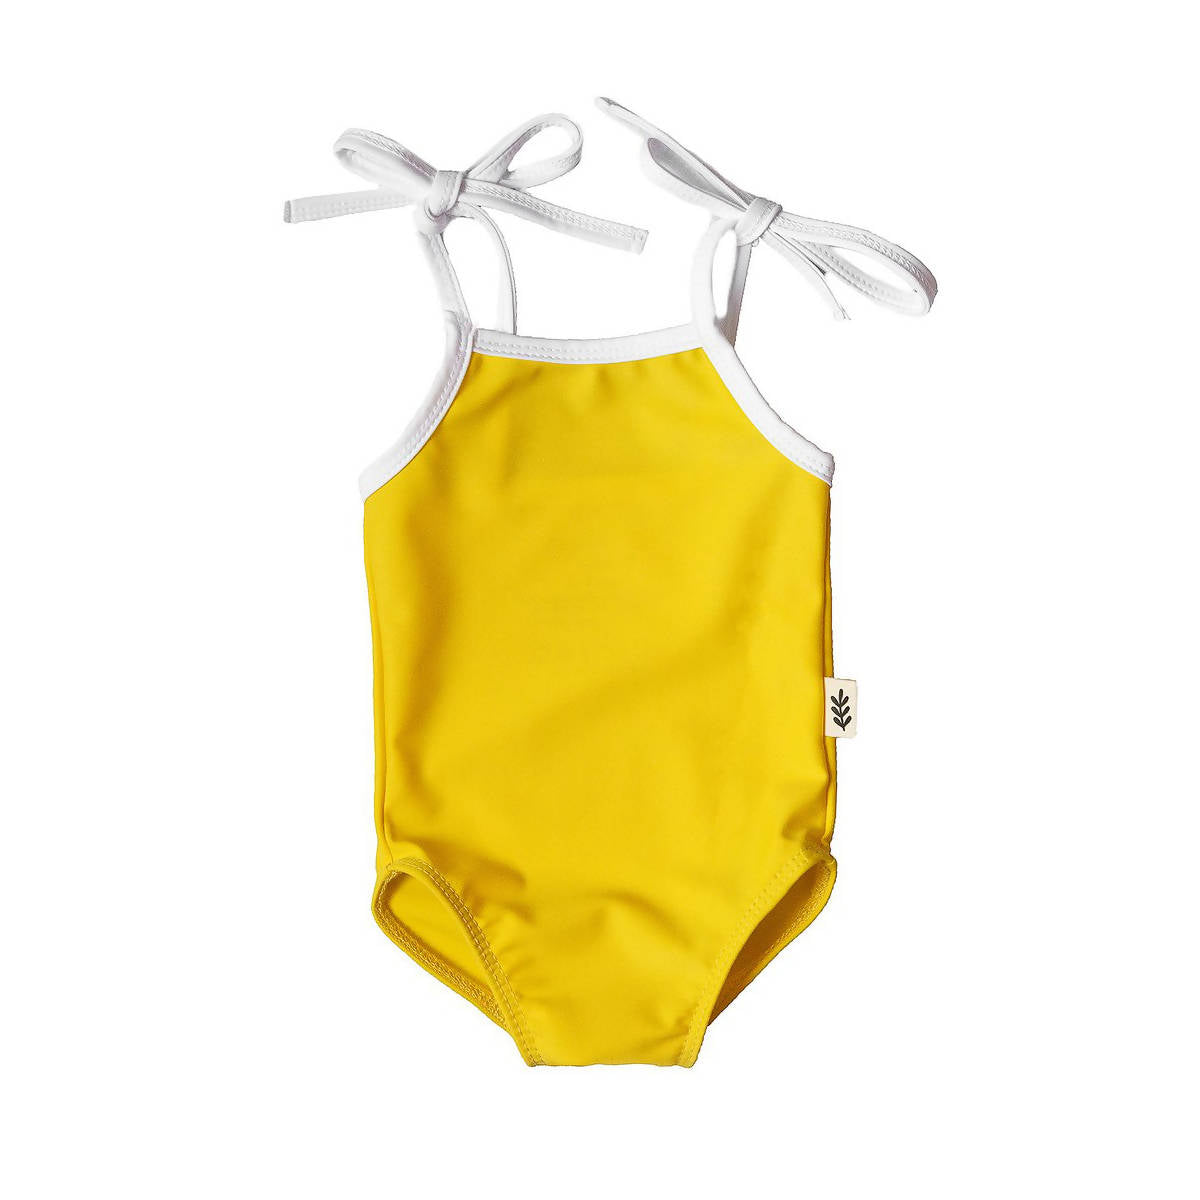 Men's Bathing Suits and Swimwear - Ernest